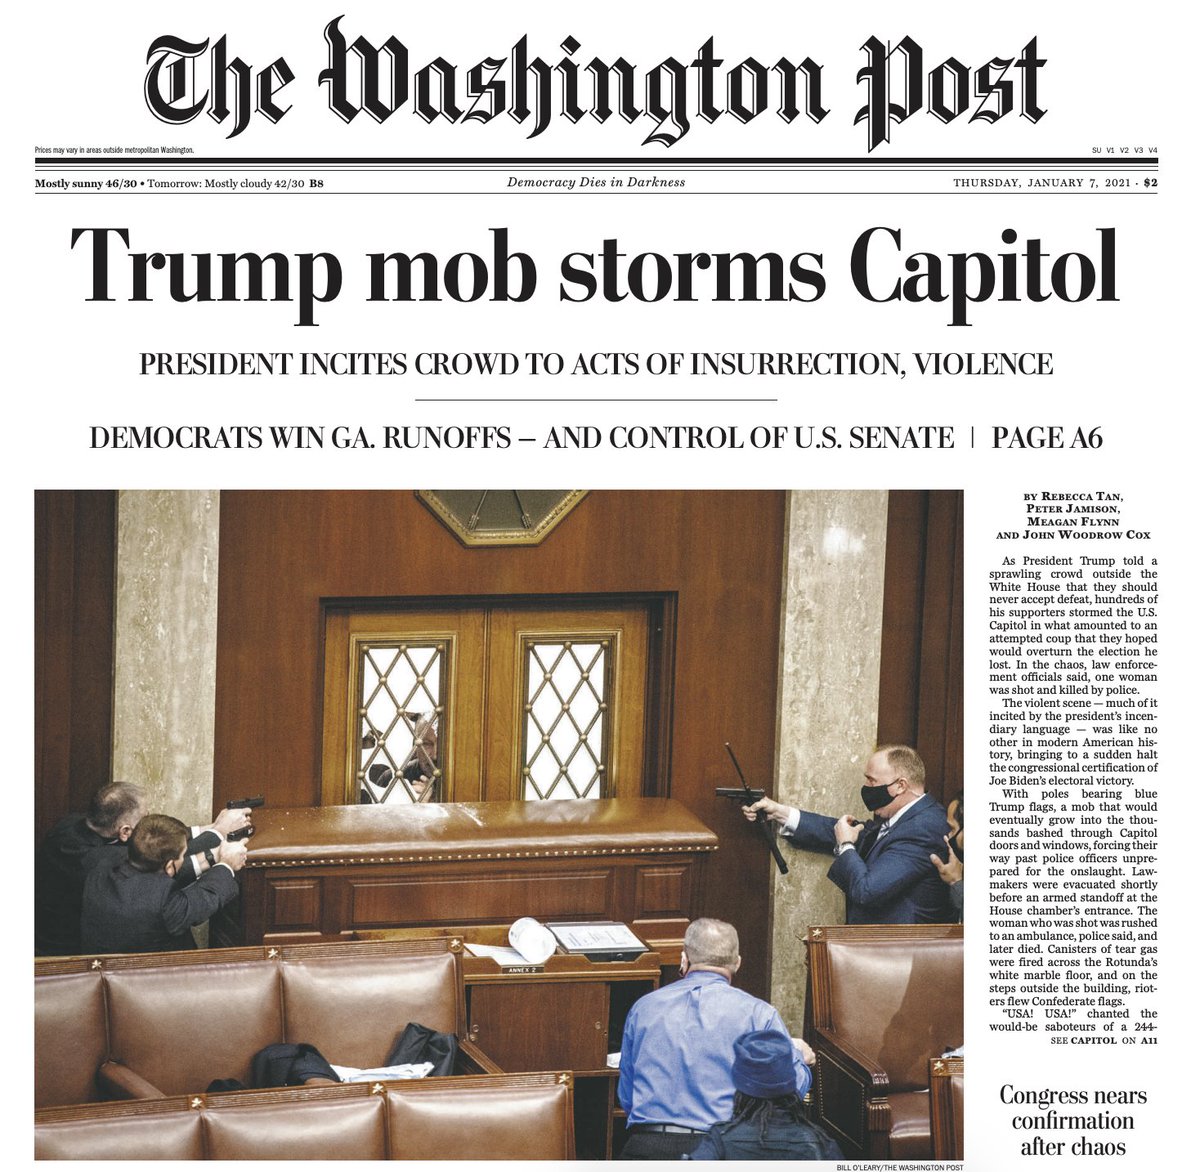 Roundup of front pages from around the country (thread)